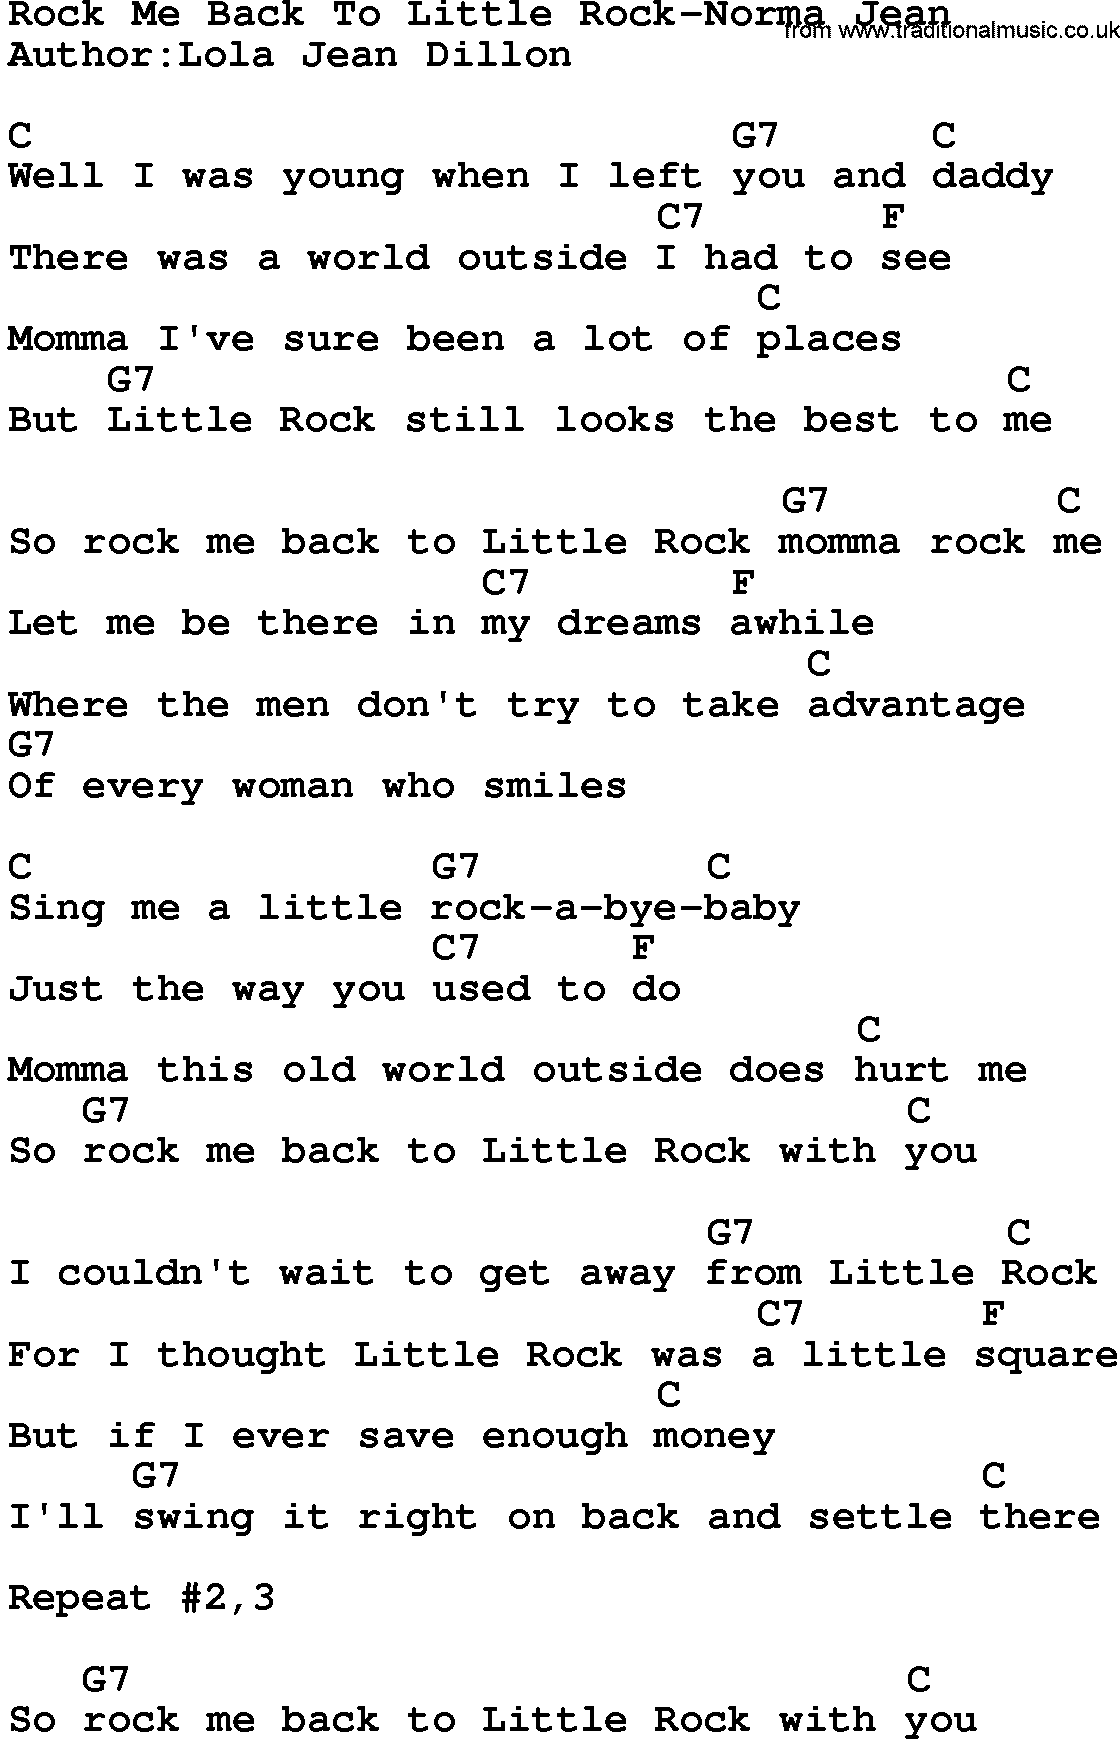 Country music song: Rock Me Back To Little Rock-Norma Jean lyrics and chords